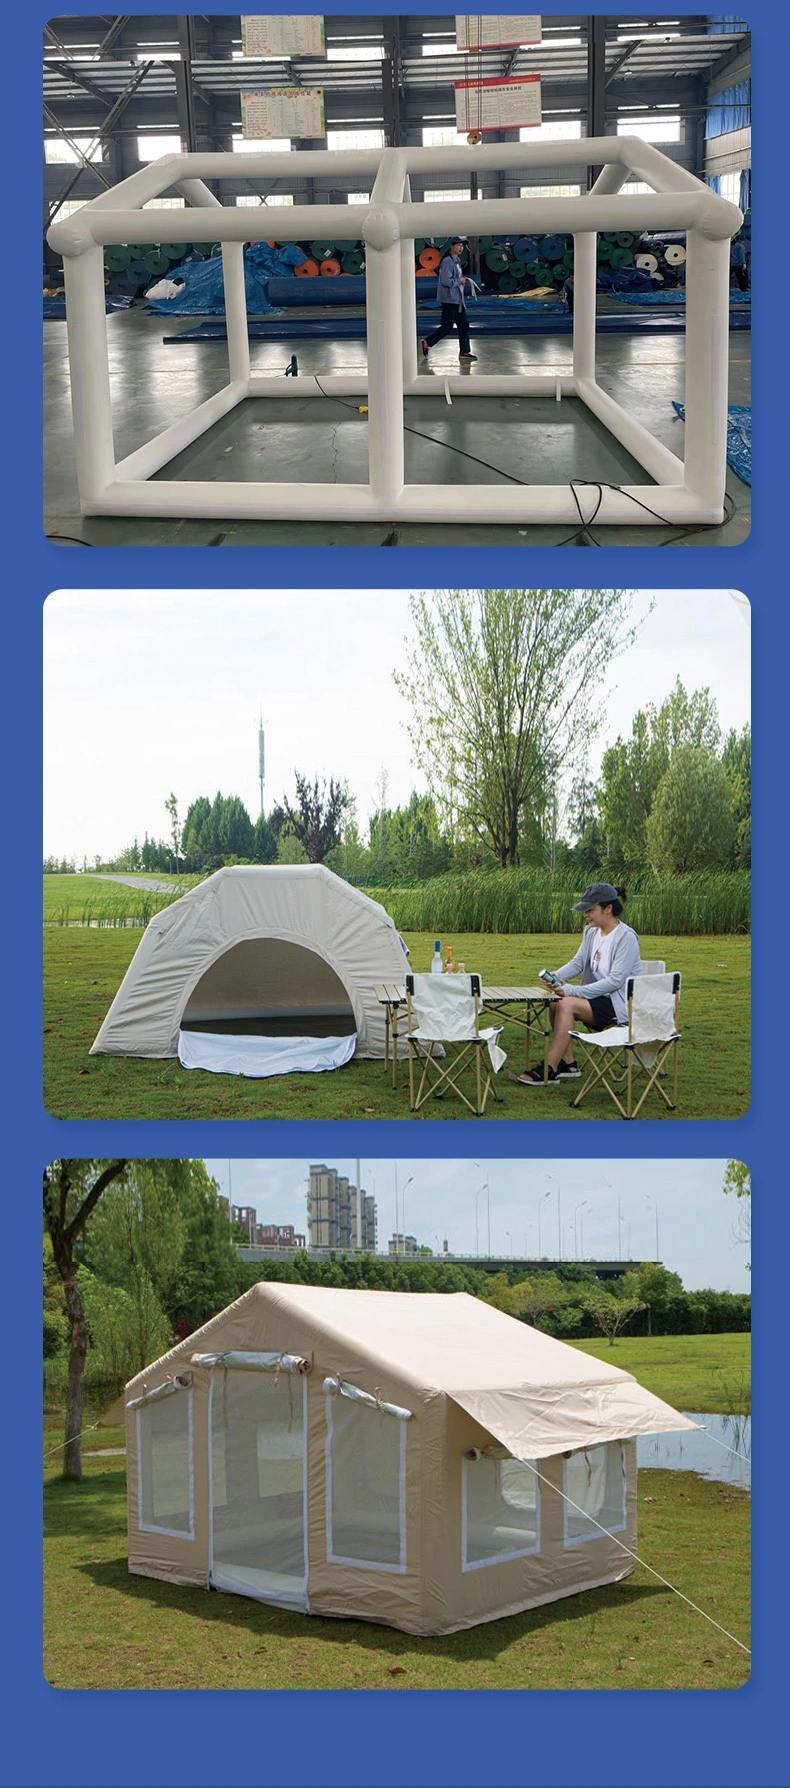 Camping Tent 3 X 2 X 2.1M size  for 2 person Popular Outdoor Activity Folding Camping Hiking Large Inflatable Tent Event Camping Tent,Large Inflatable Tent